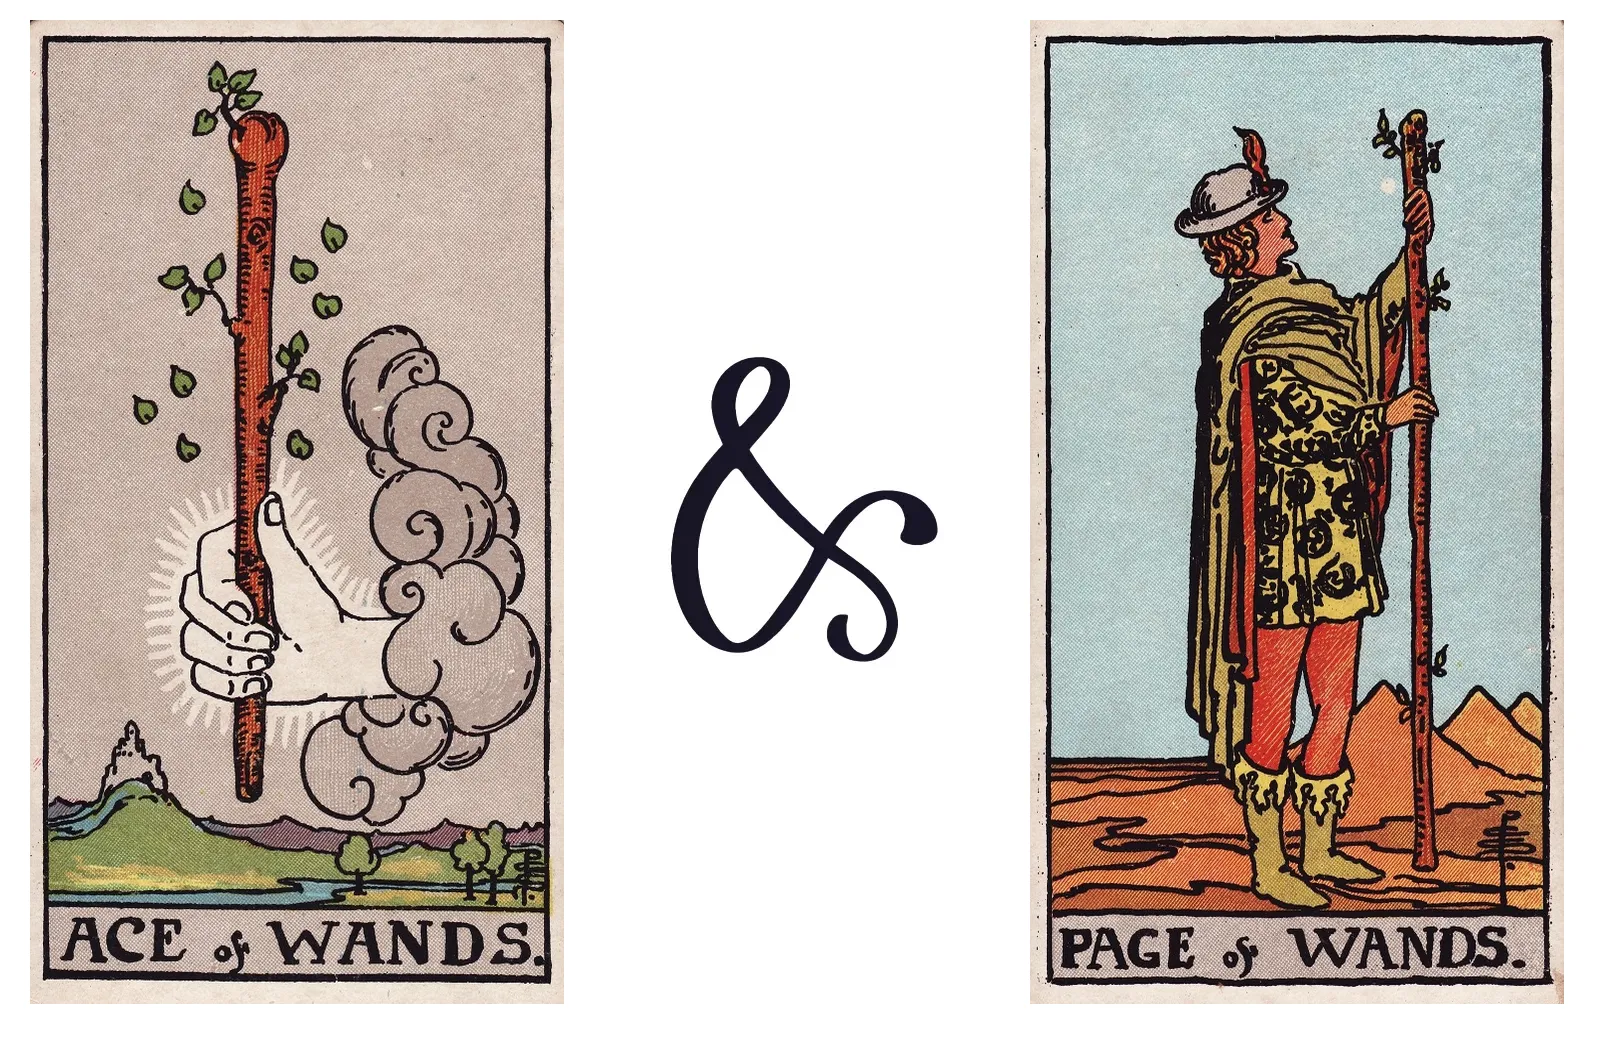 Ace of Wands and Page of Wands